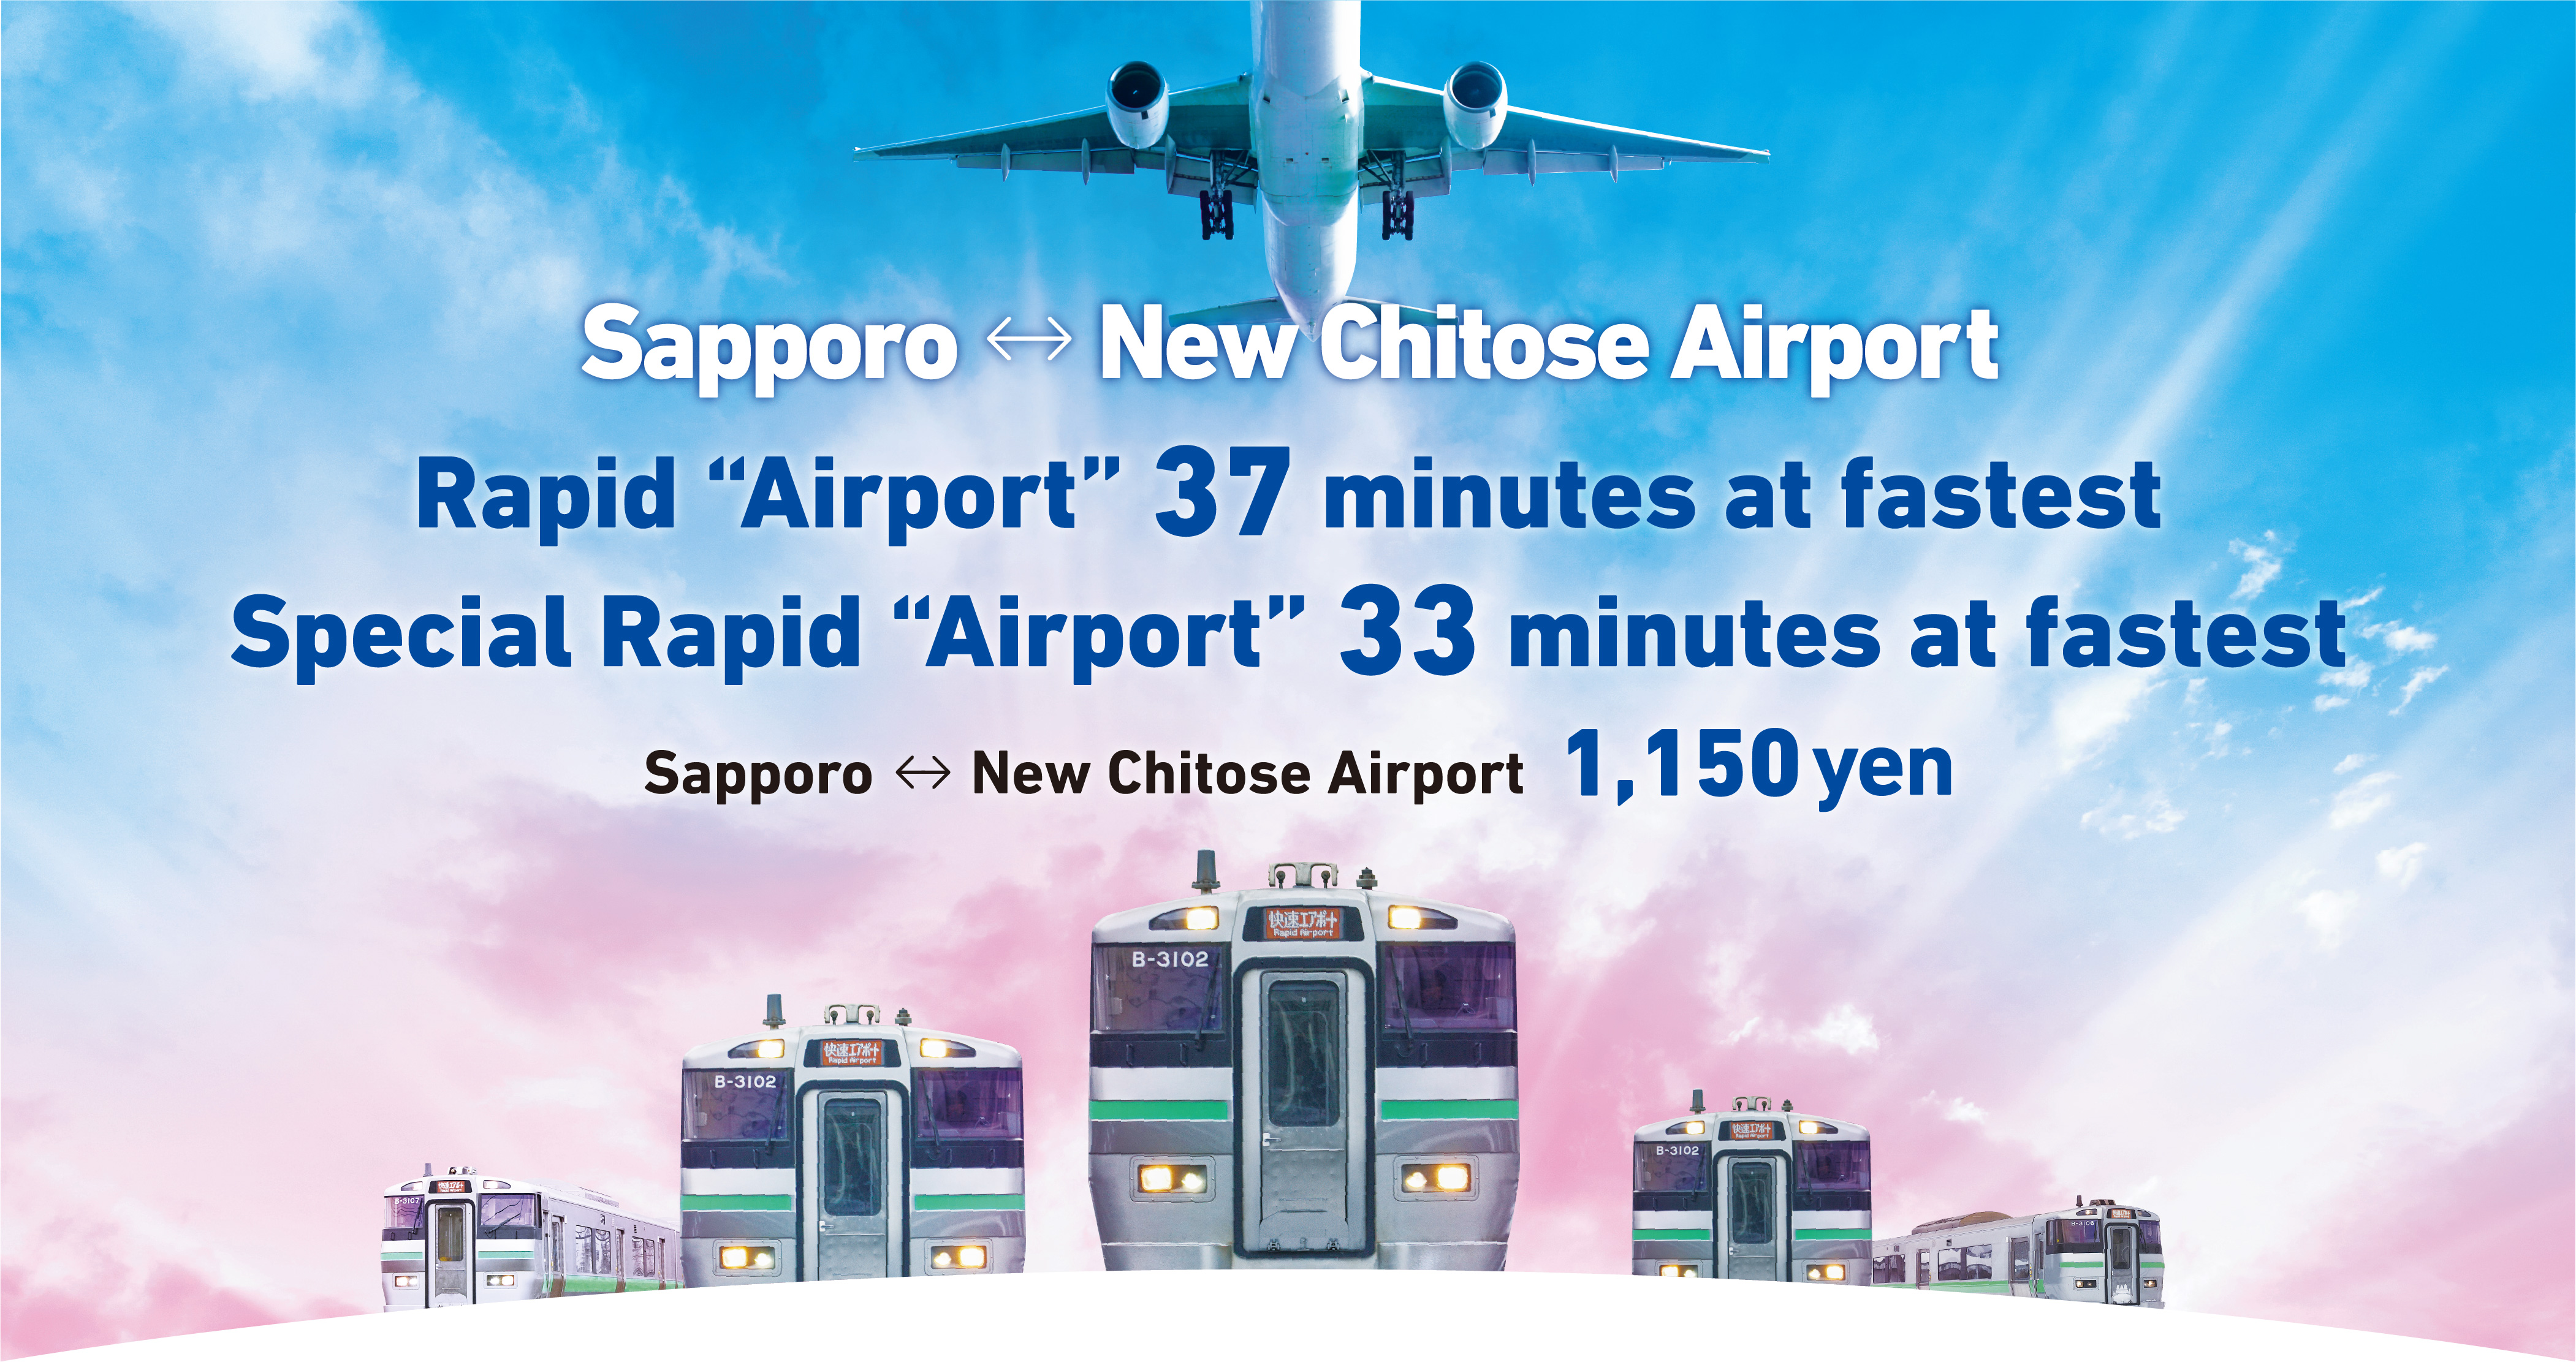 Sapporo ↔ New Chitose Airport Rapid “Airport” 37 minutes at fastest Special Rapid “Airport” 33 minutes at fastest Sapporo ↔ New Chitose Airport 1,150 yen